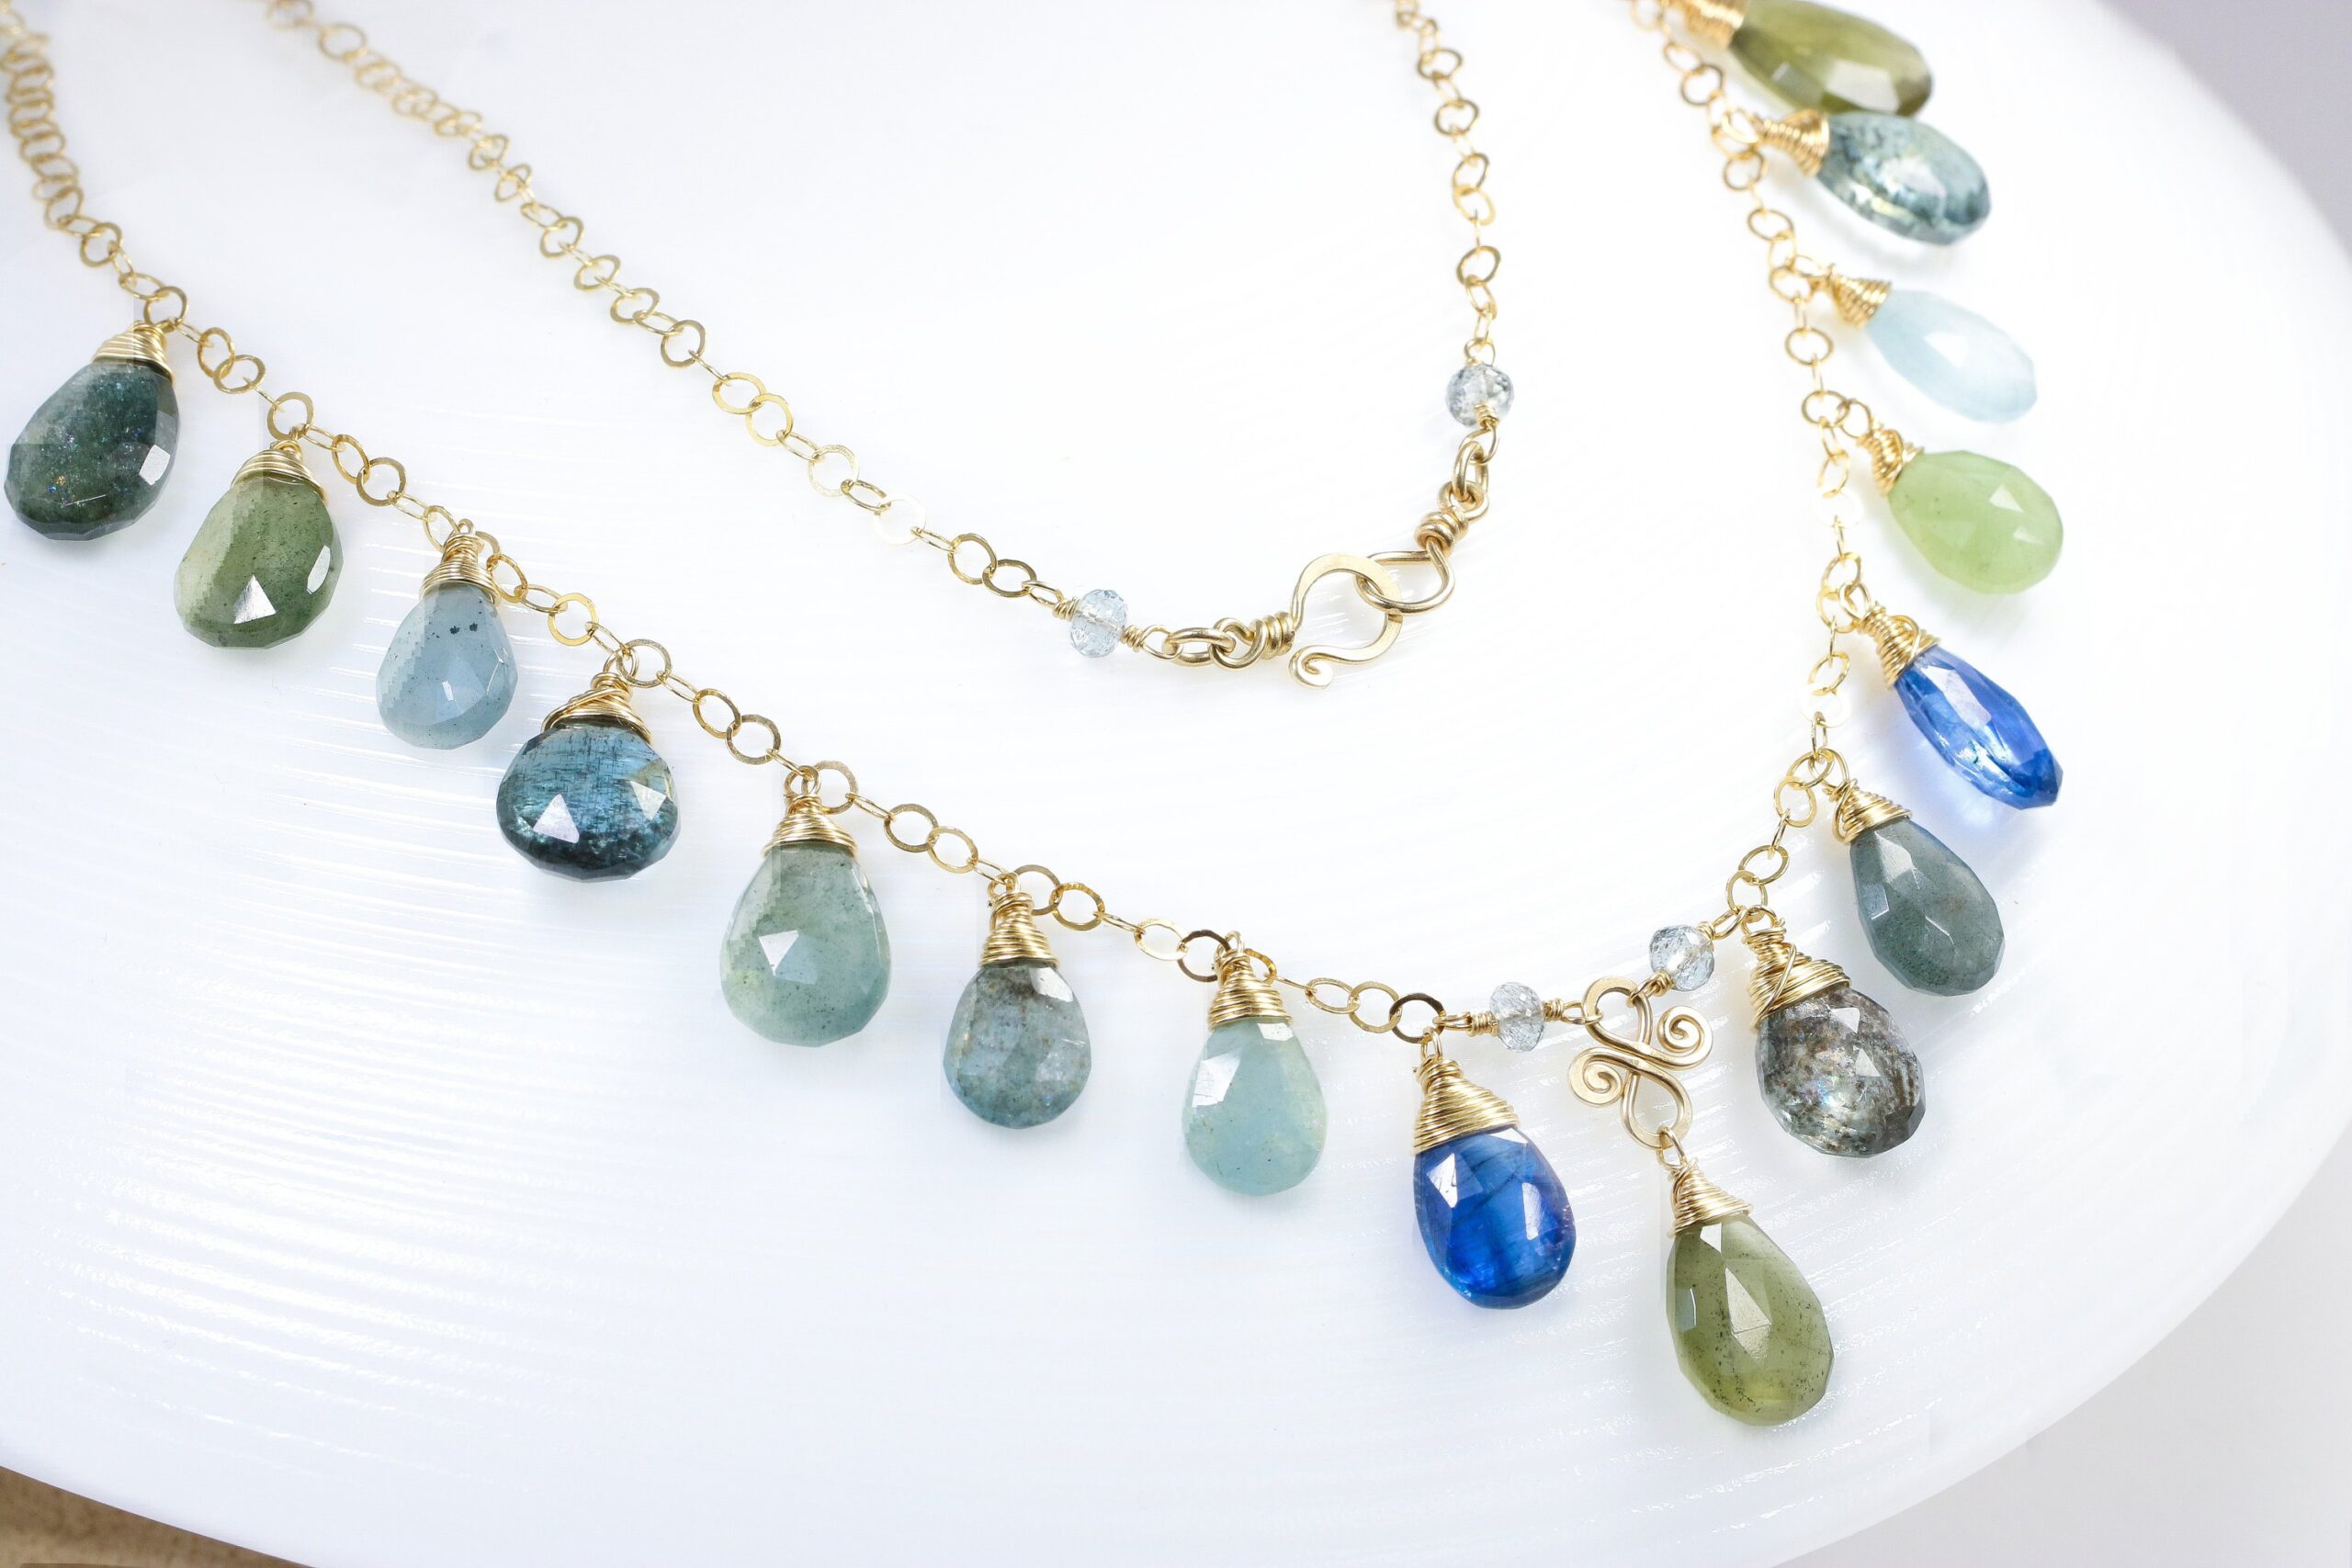 Moss Aquamarine and Kyanite Statement Drop Necklace, One of a Kind